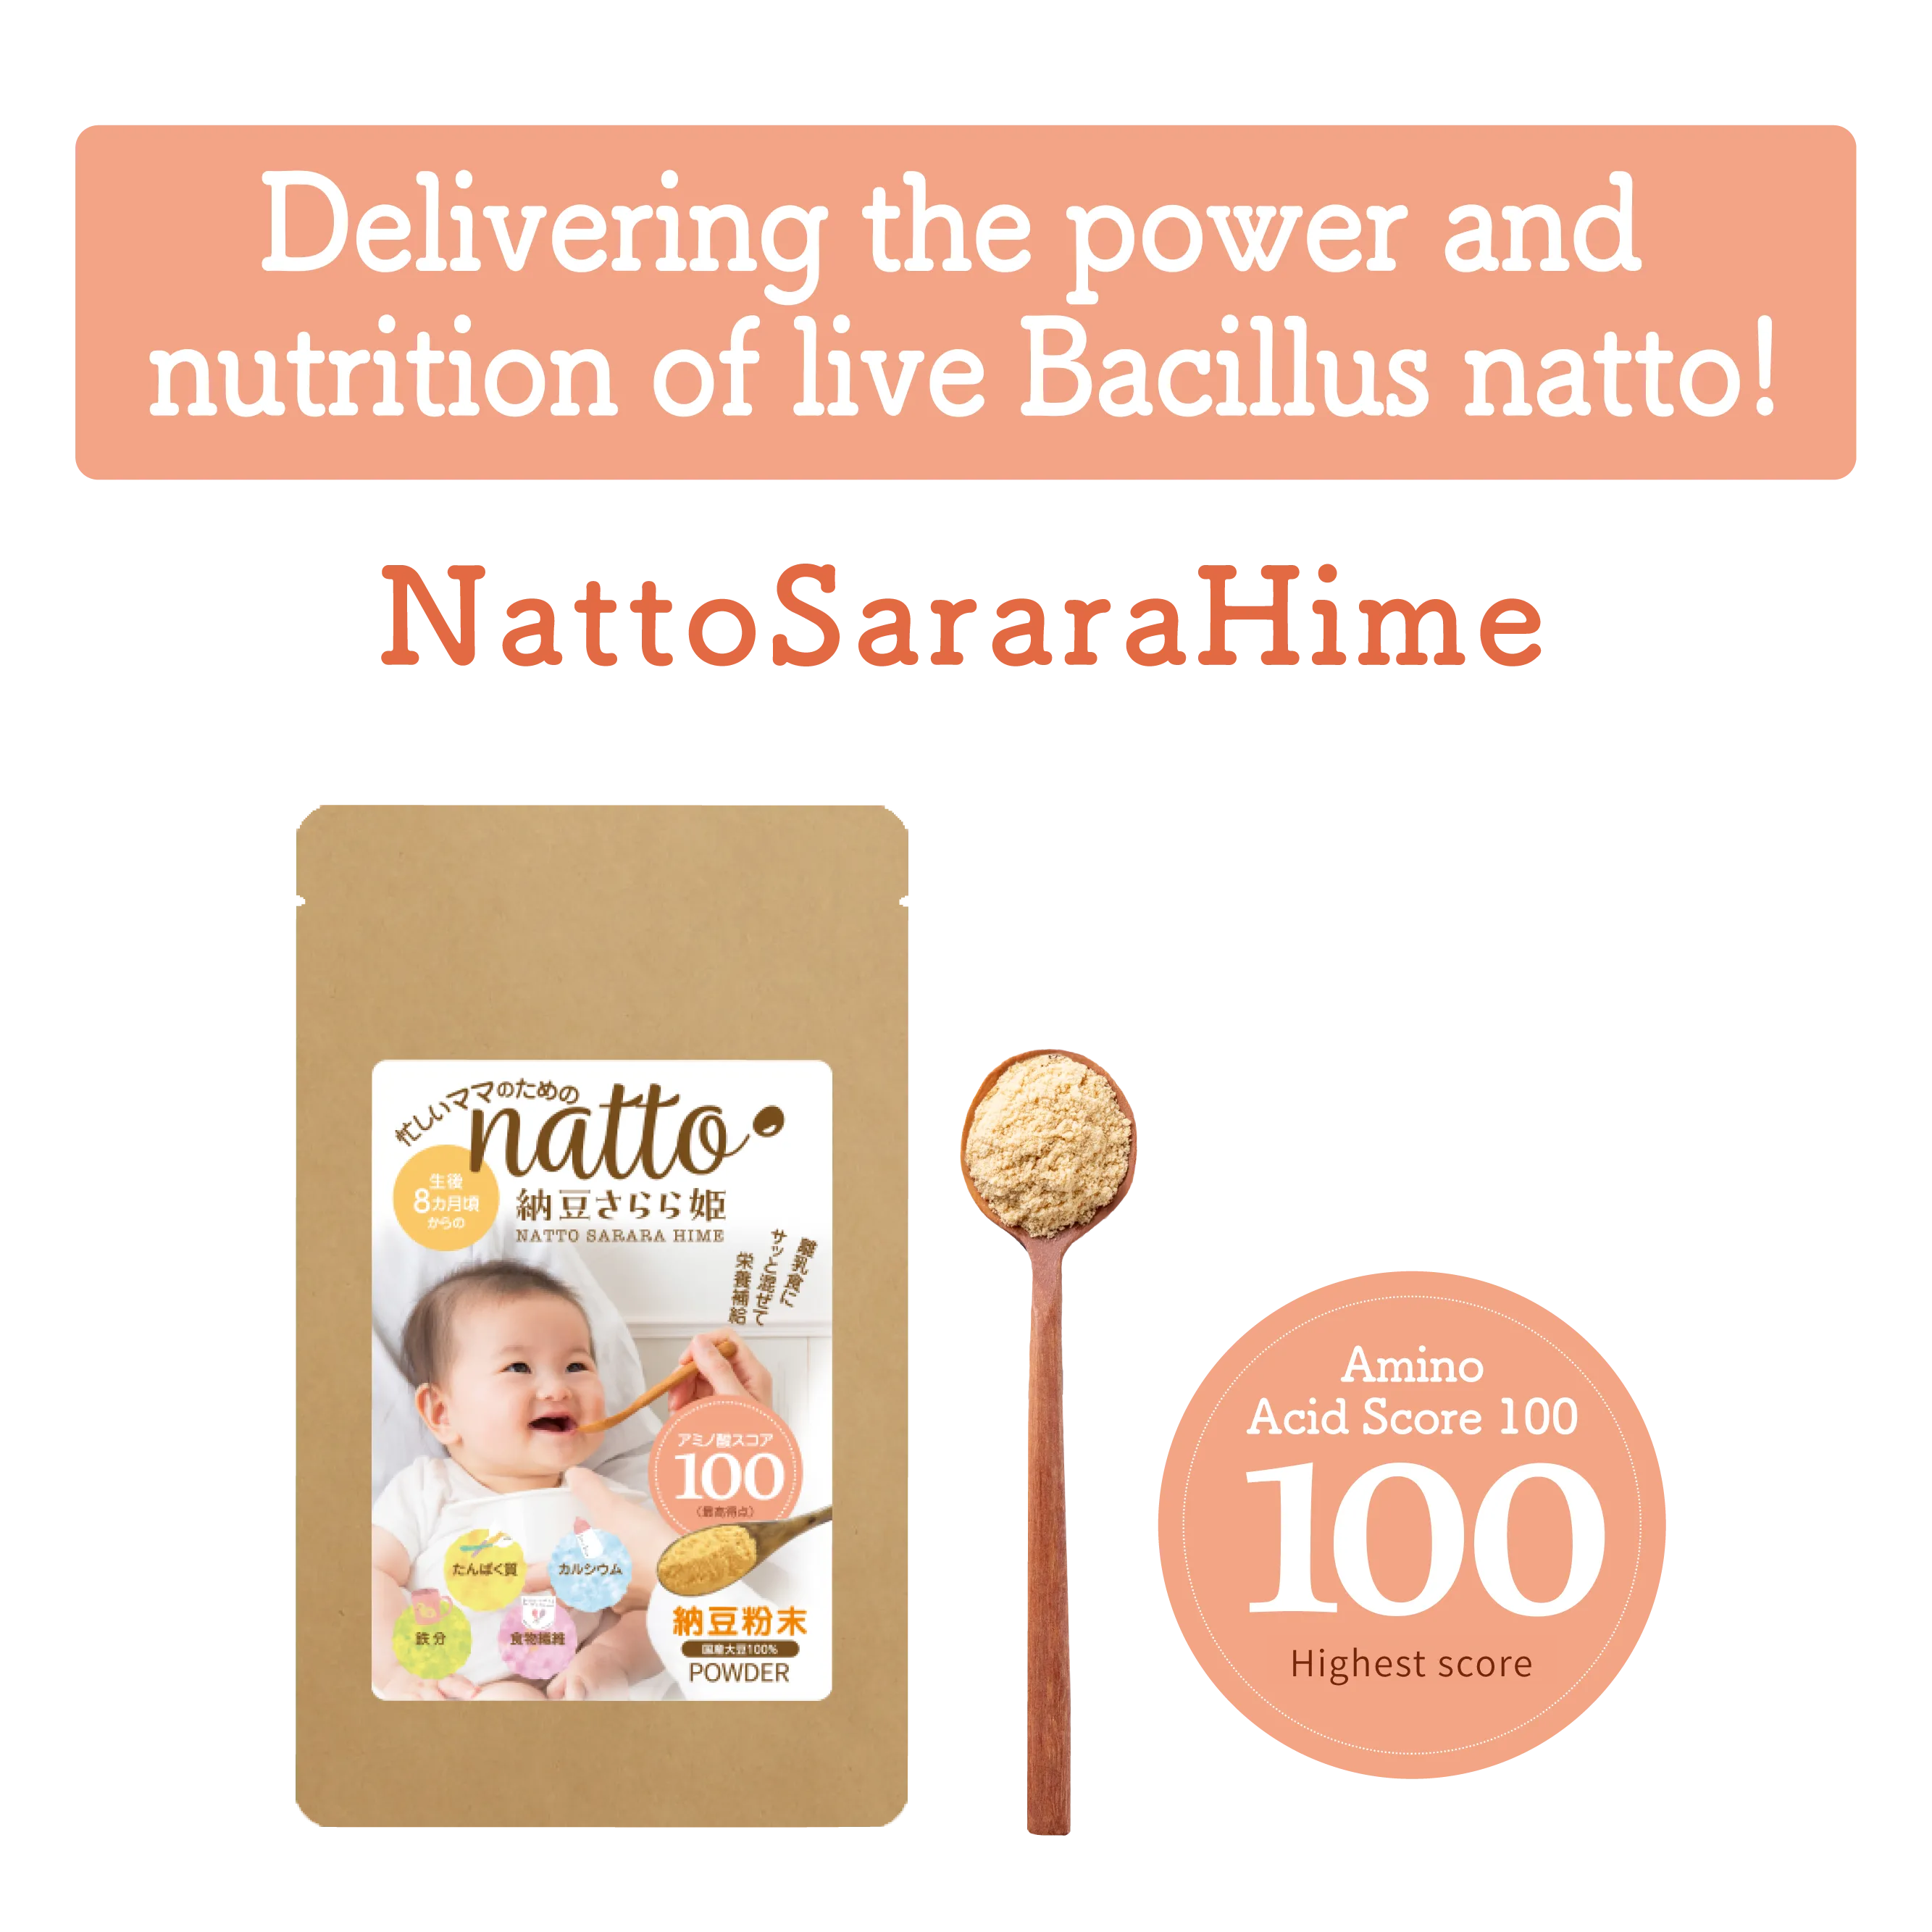 Deliver the power of living natto bacteria!